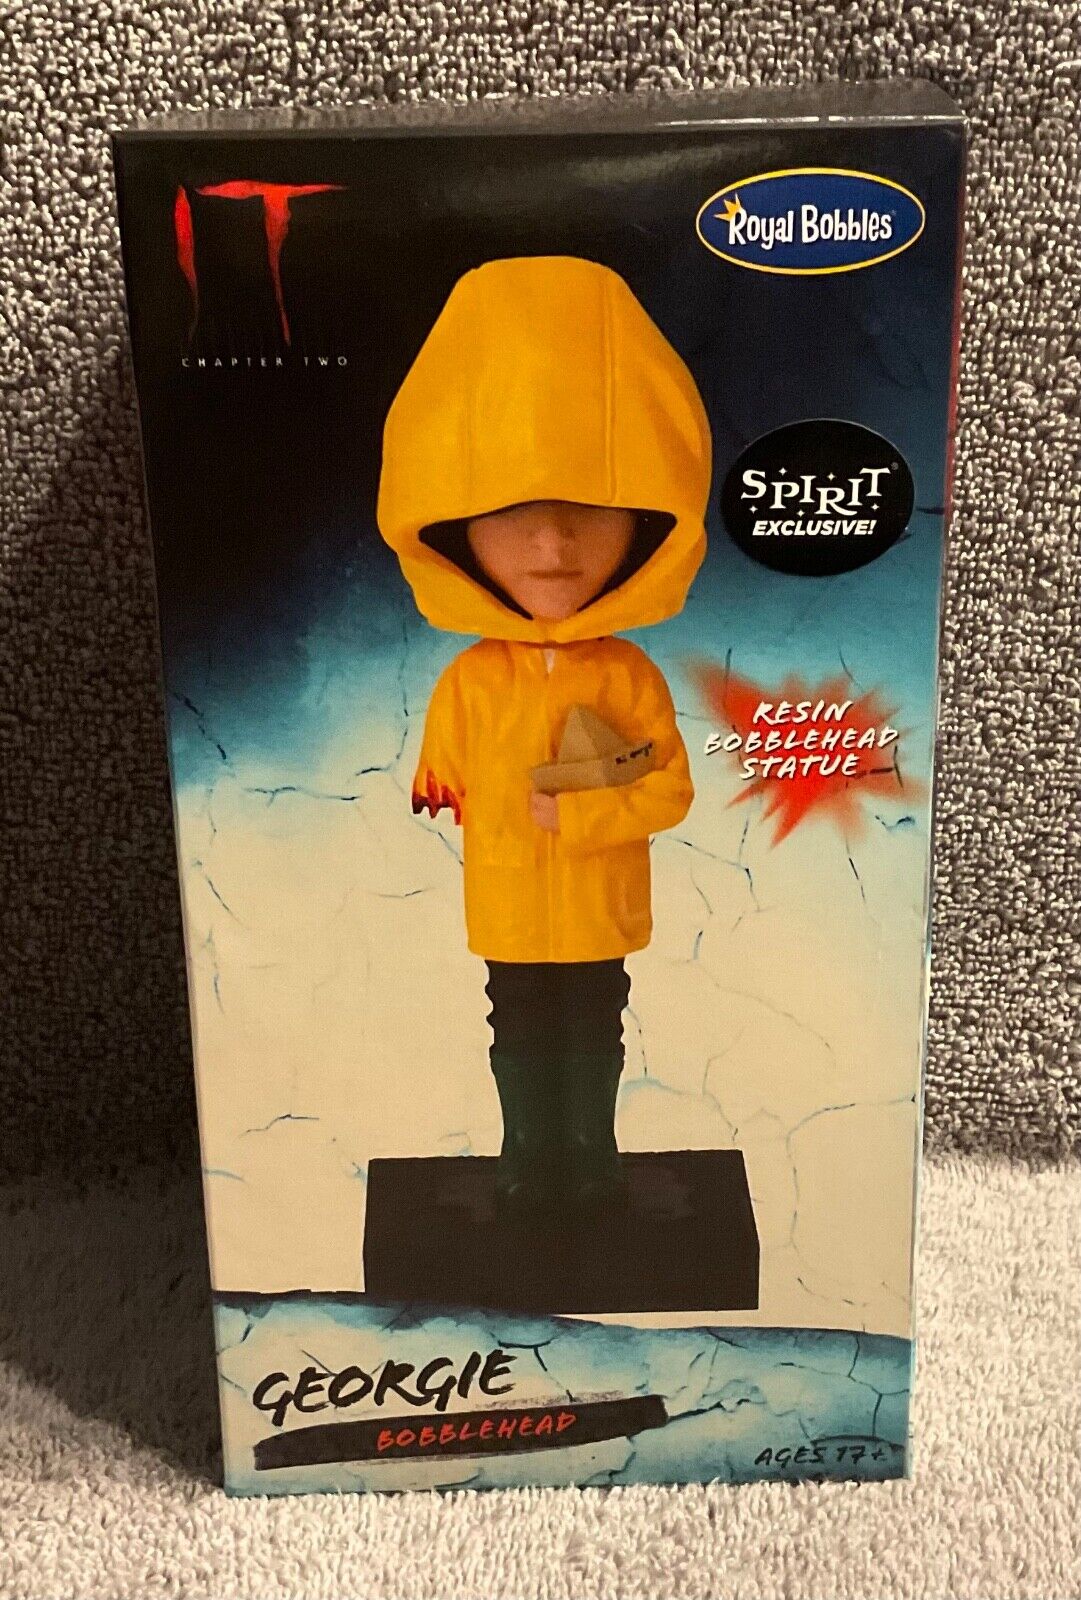 Armless Georgie IT (Pennywise) Resin Bobblehead Statue by Royal Bobbles